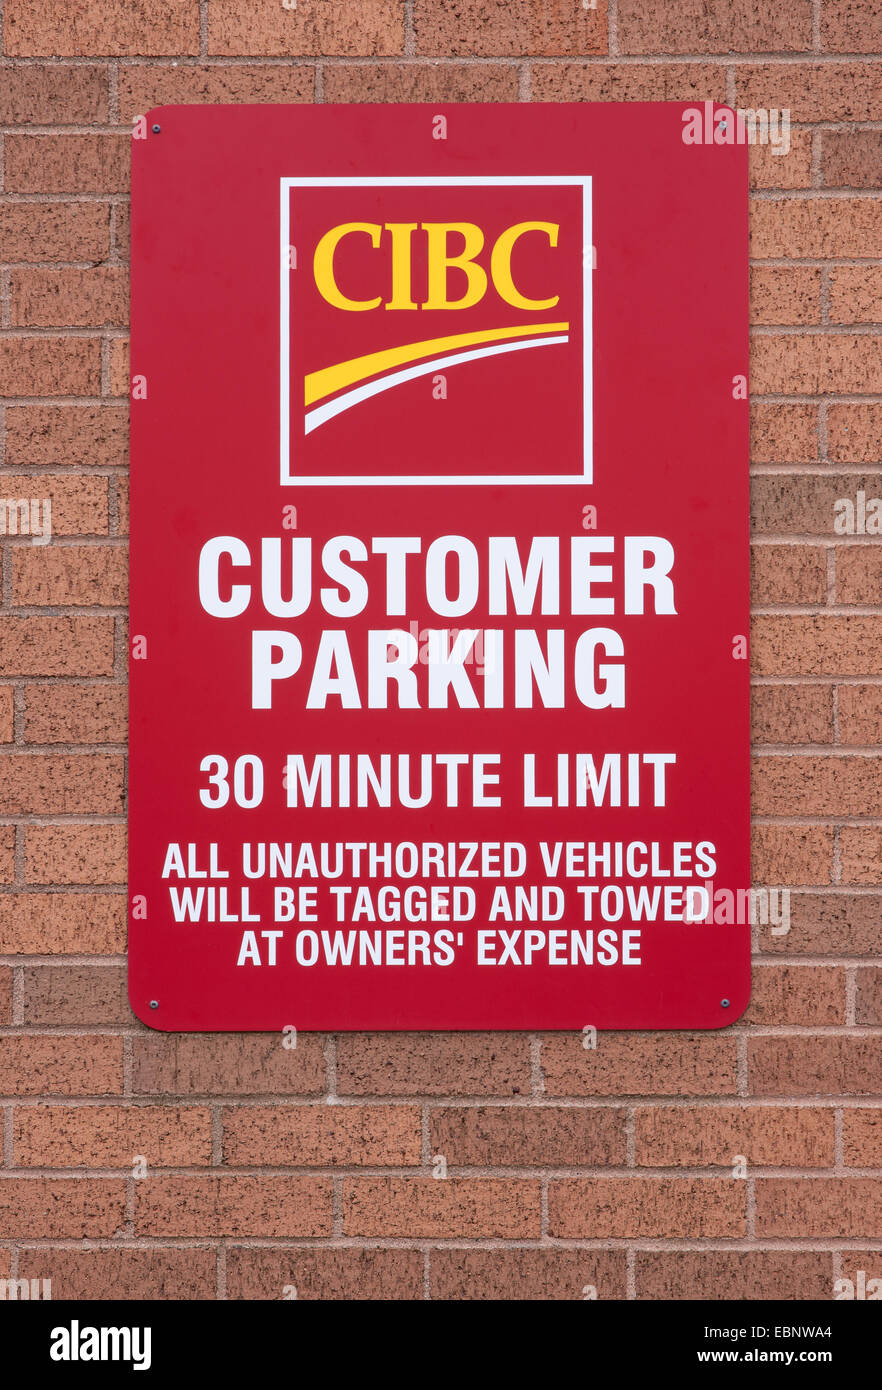 TRURO, CANADA - NOVEMBER 30, 2014: The Canadian Imperial Bank of Commerce is a Canadian chartered bank. Stock Photo